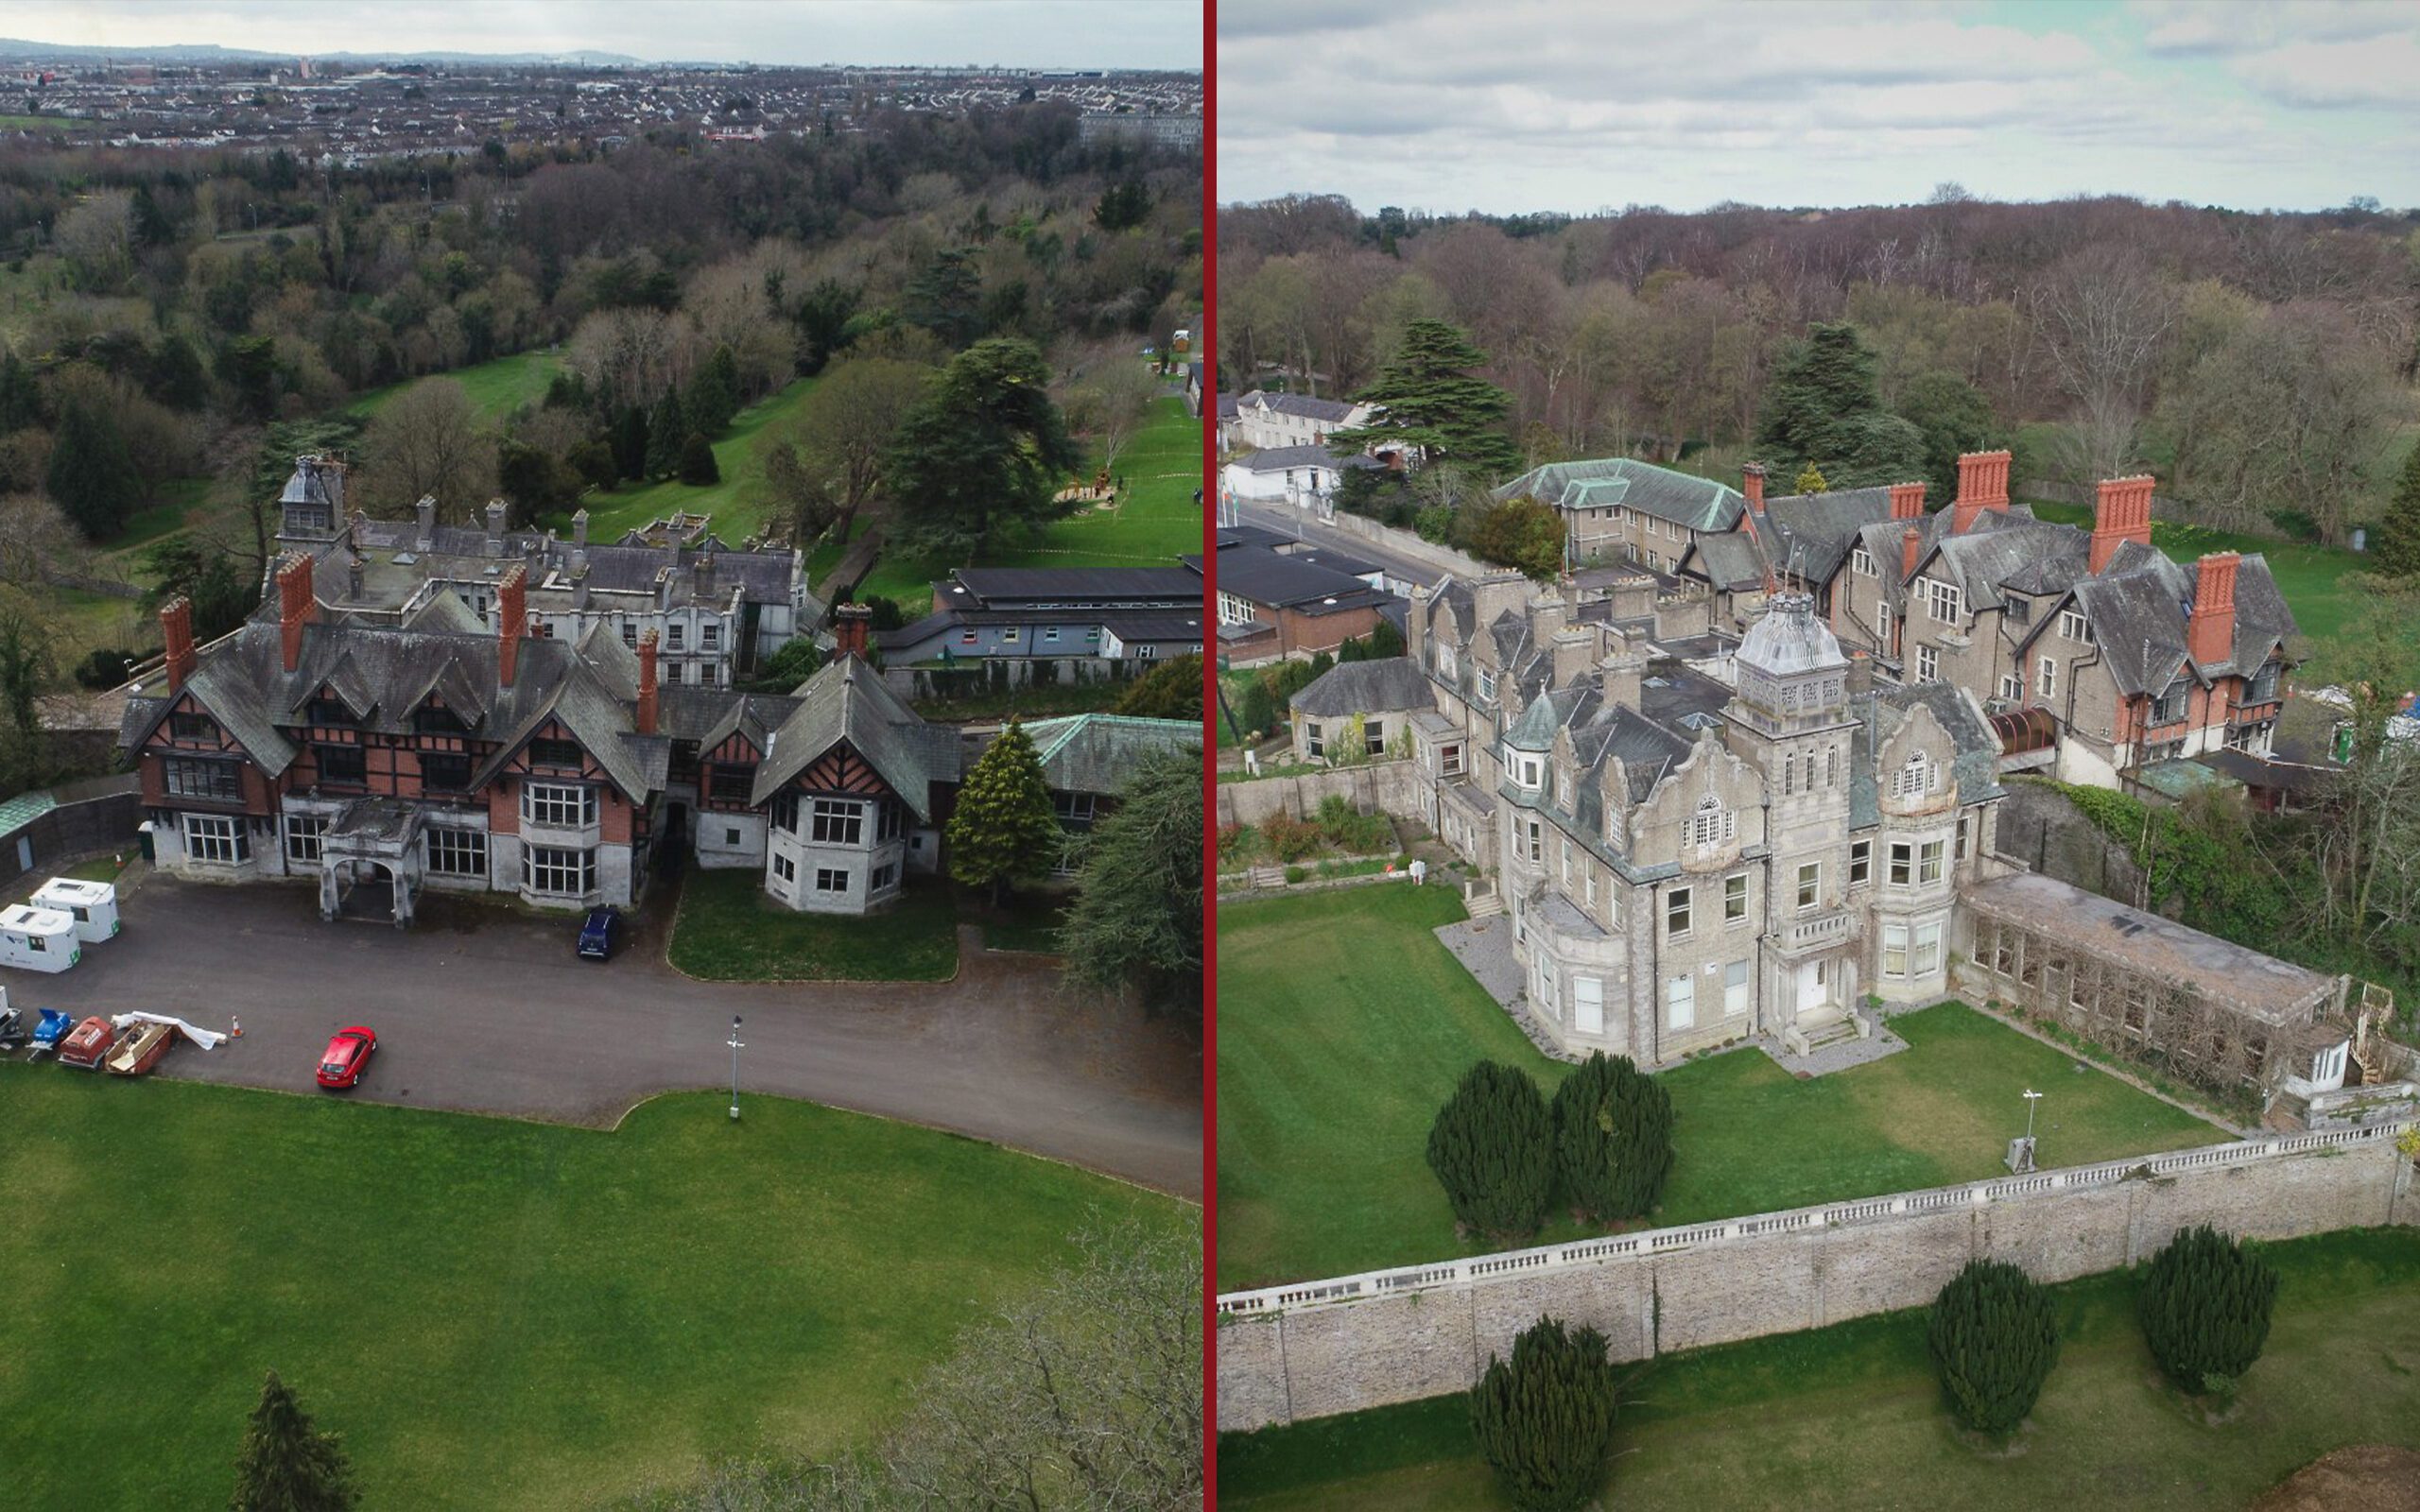 Glenmaroon House and Knockmaroon Lodge captured by drone in Chapelizod.